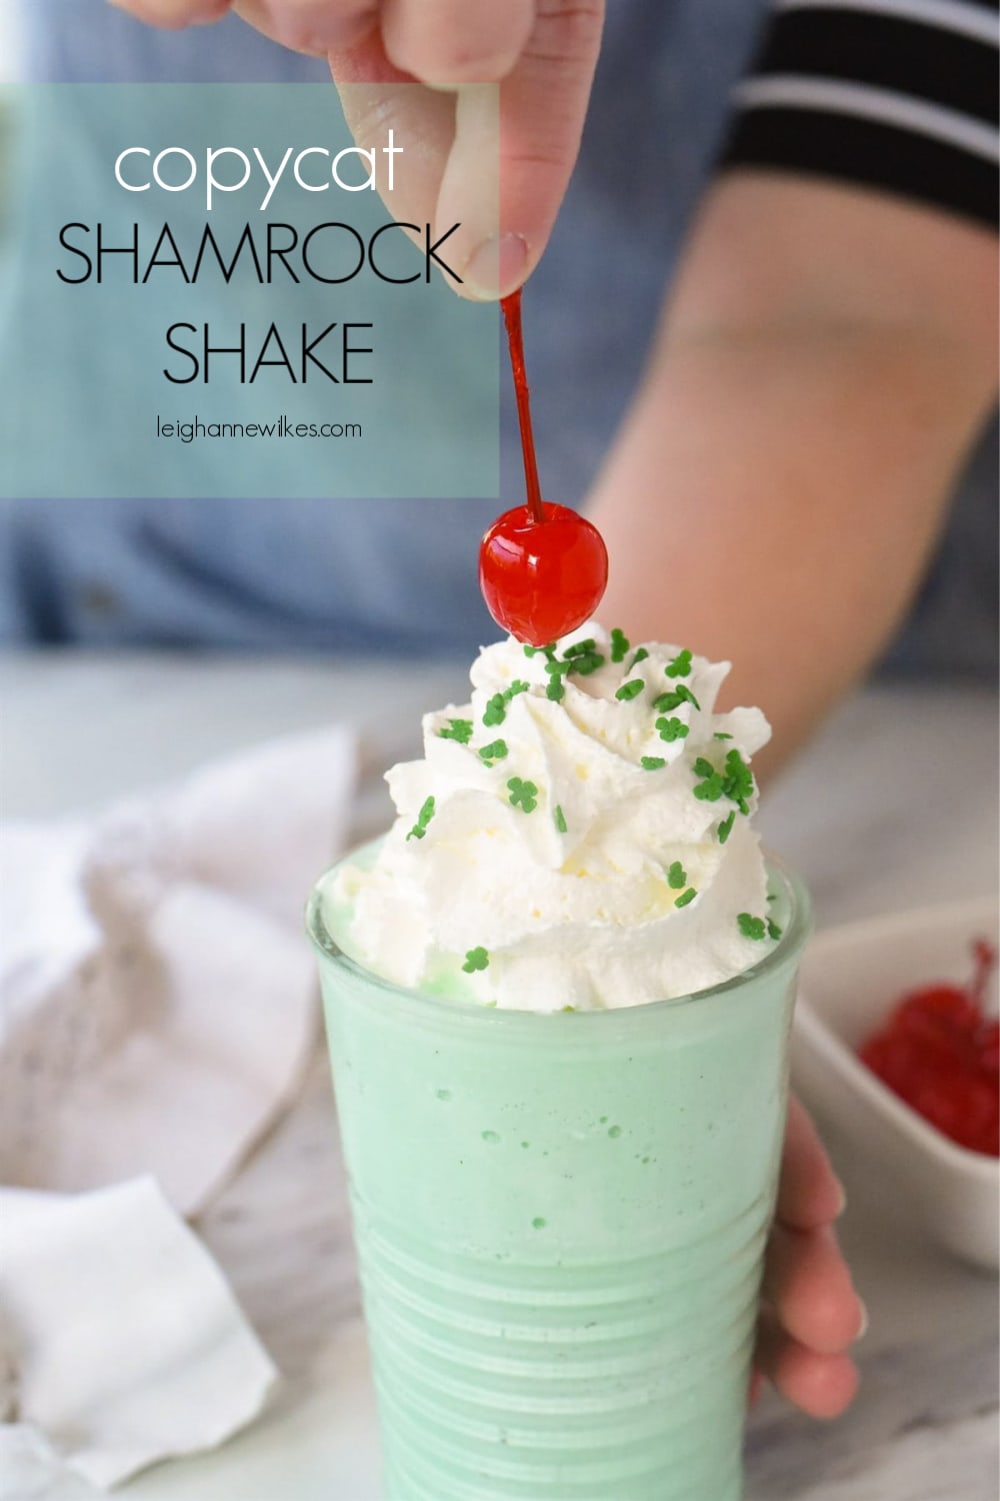 cherry on top of a shamrock shake